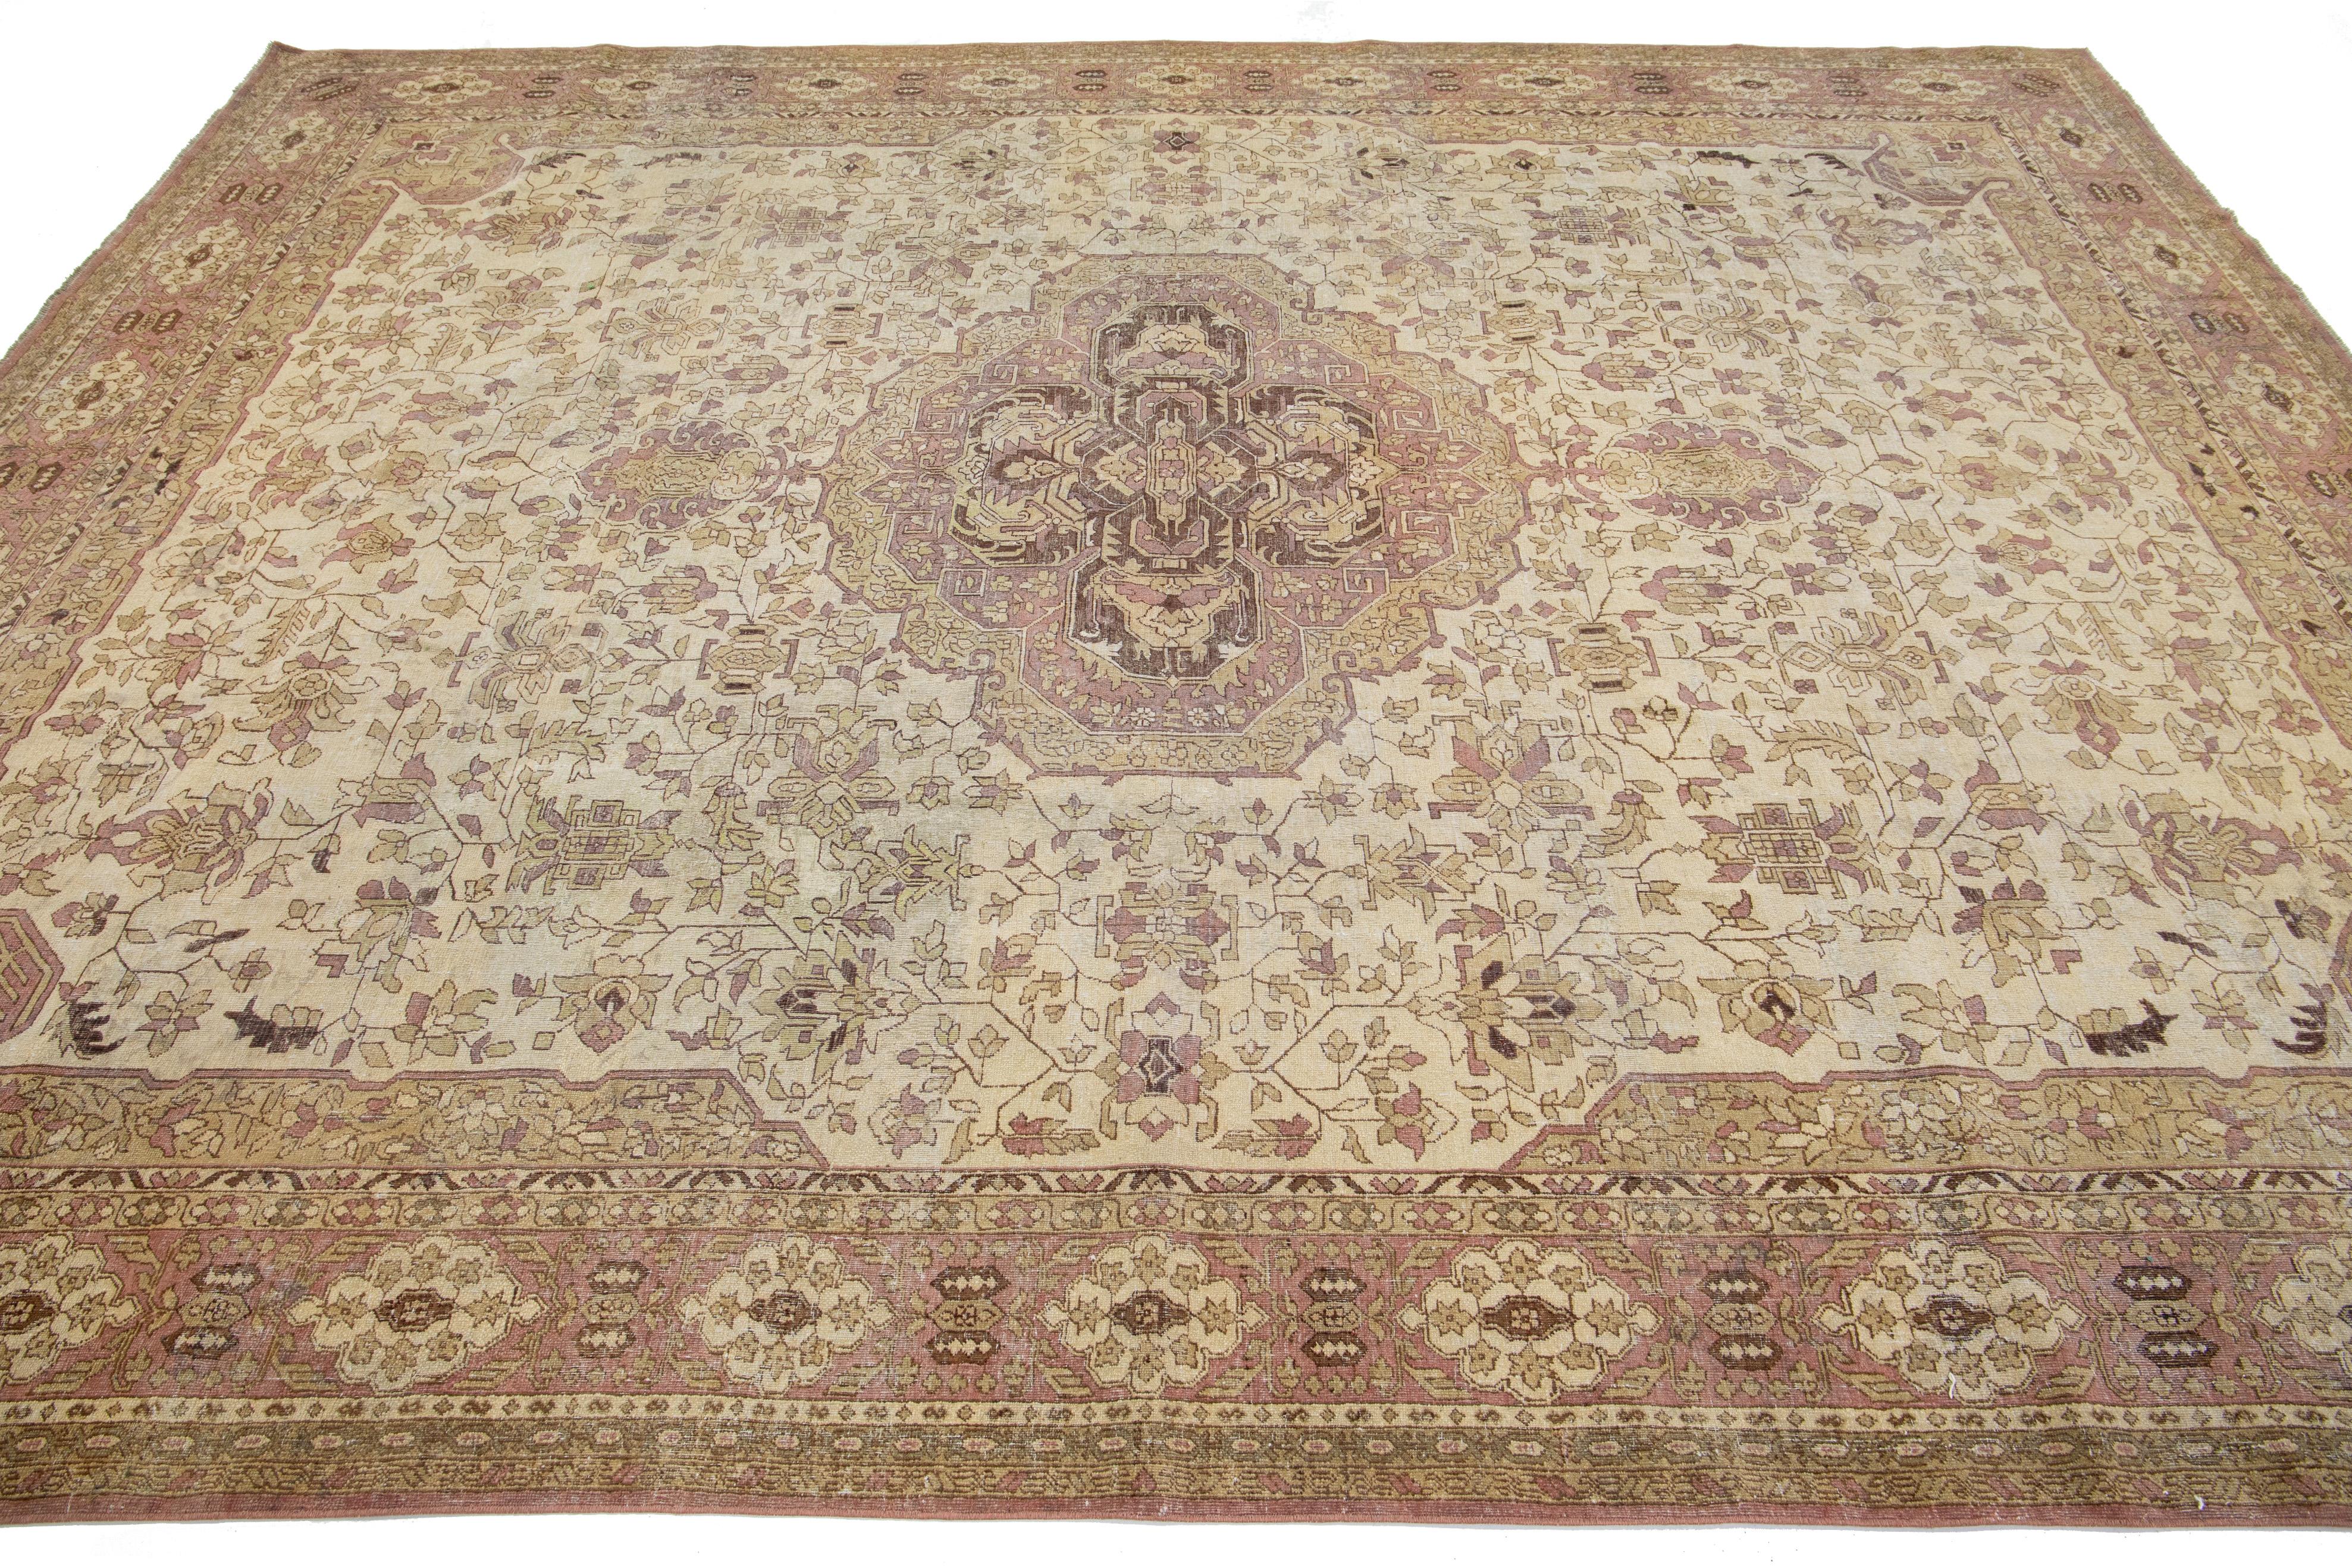 1910s Antique Indian Wool Agra Rug In Beige with Allover Design  In Good Condition For Sale In Norwalk, CT